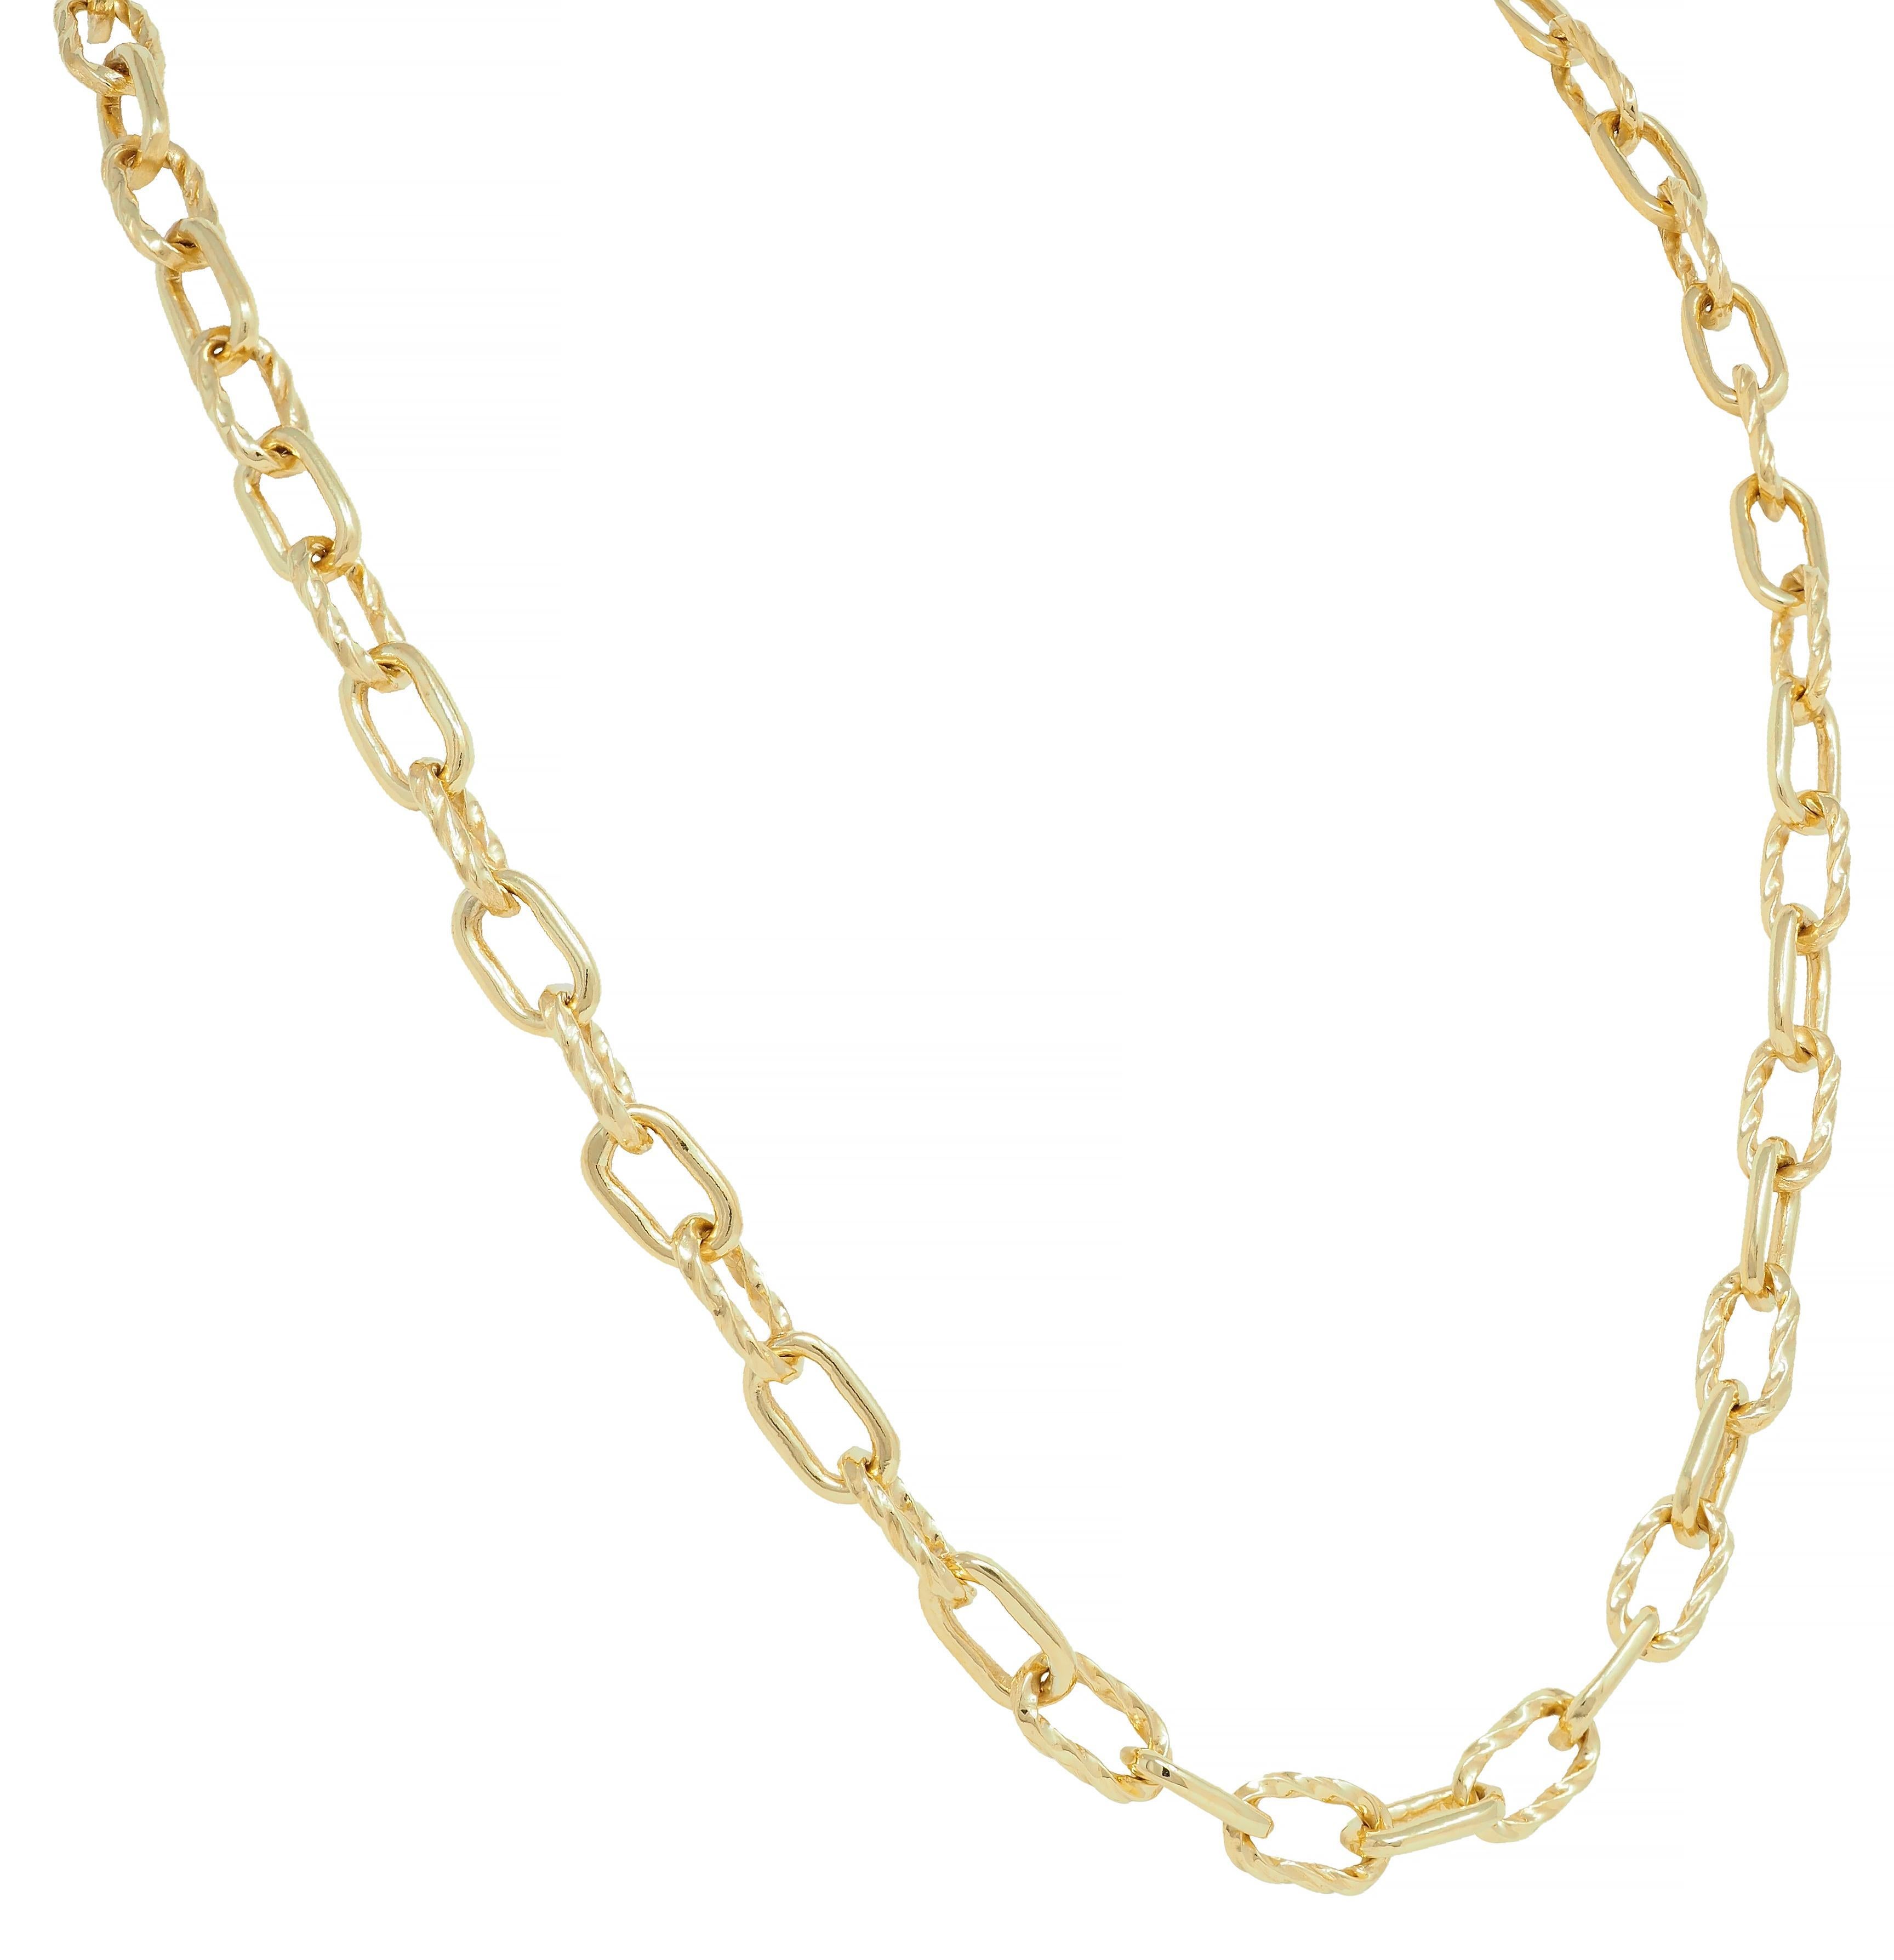 1960's 18 Karat Yellow Gold Twisted Cable Link Vintage Chain Necklace For Sale 2